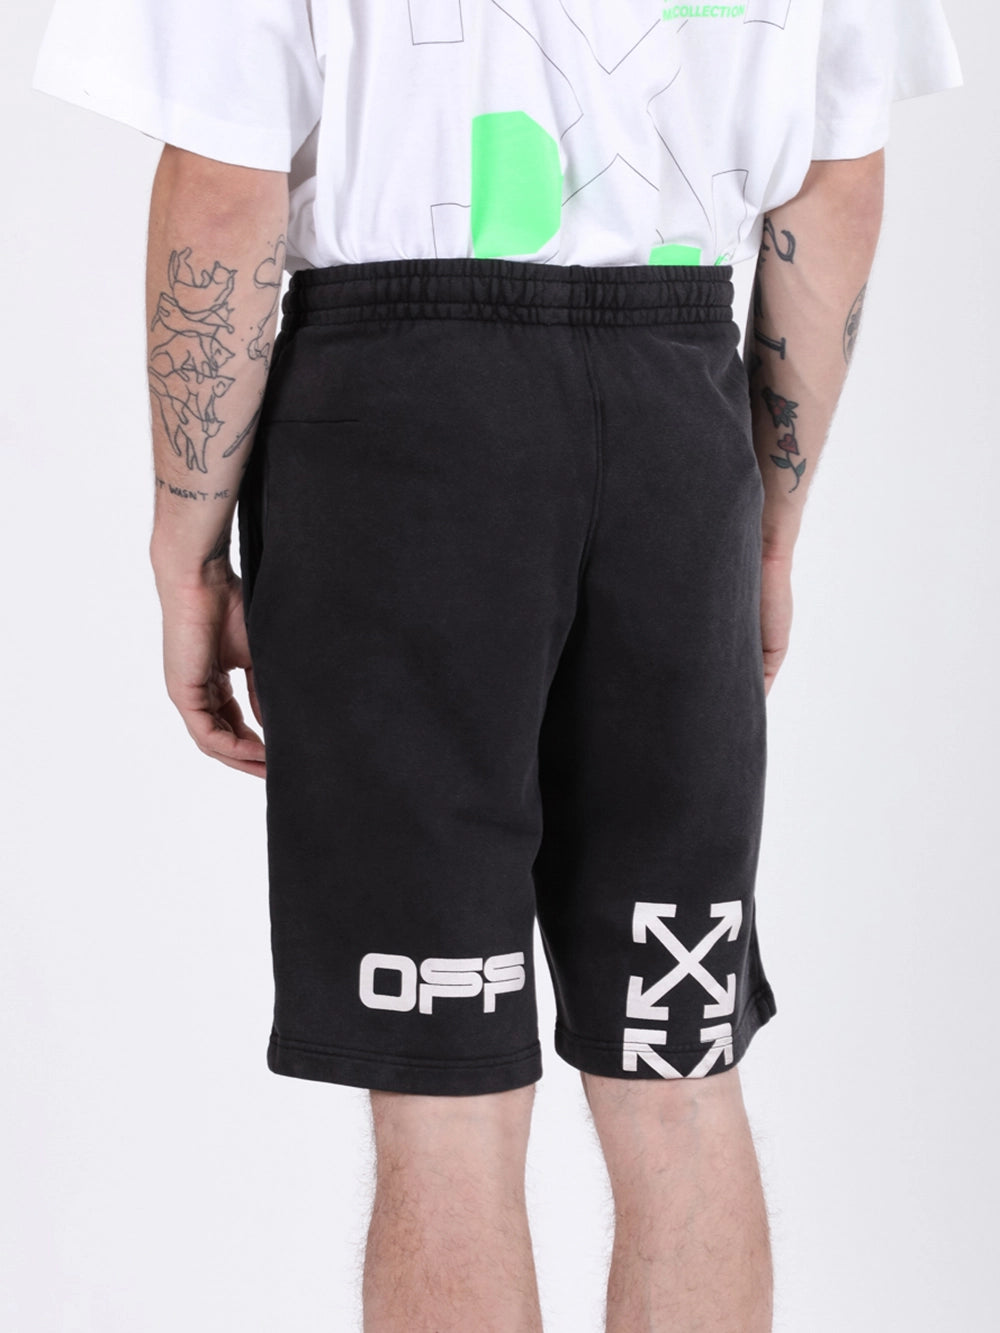 Off-White Hand Logo Printed Shorts in Black